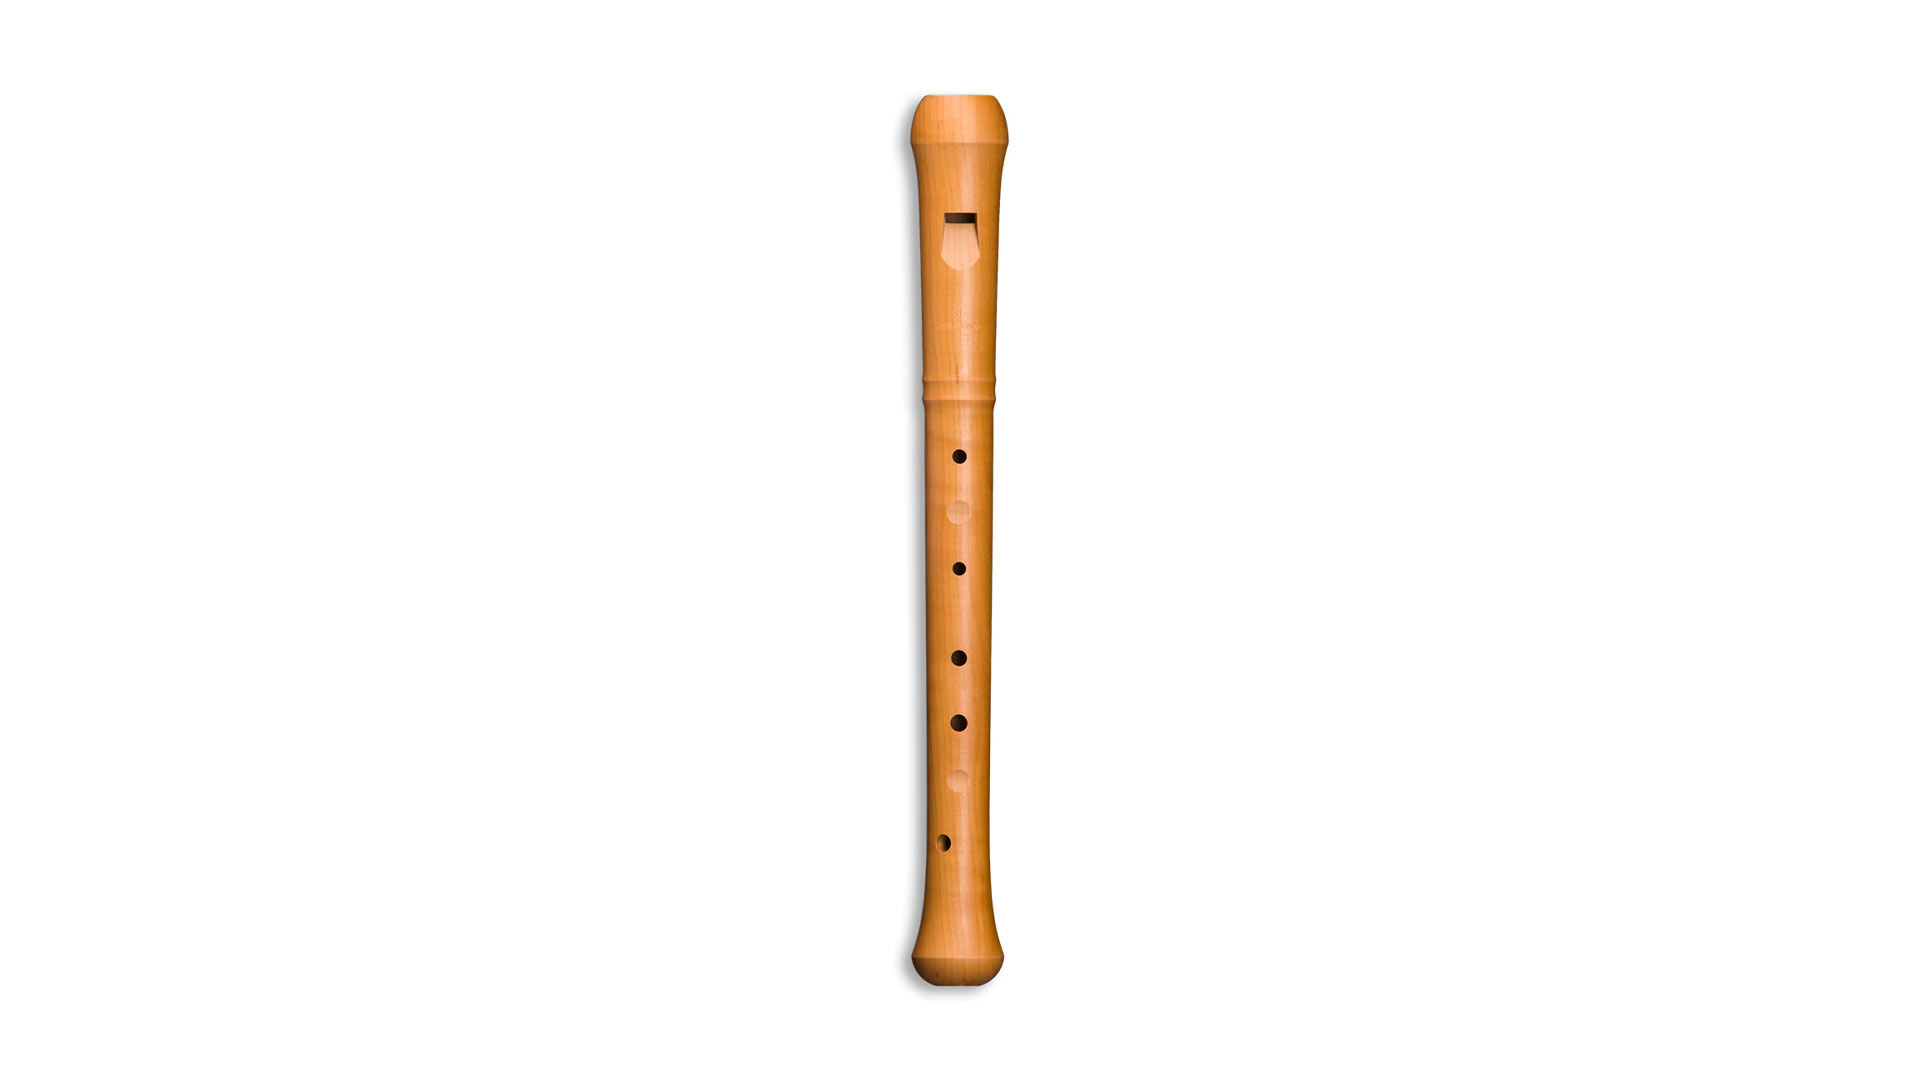 Mollenhauer, "Waldorf-Edition", "Bäumling" in d', 442 Hz, 7-note flute, pearwood